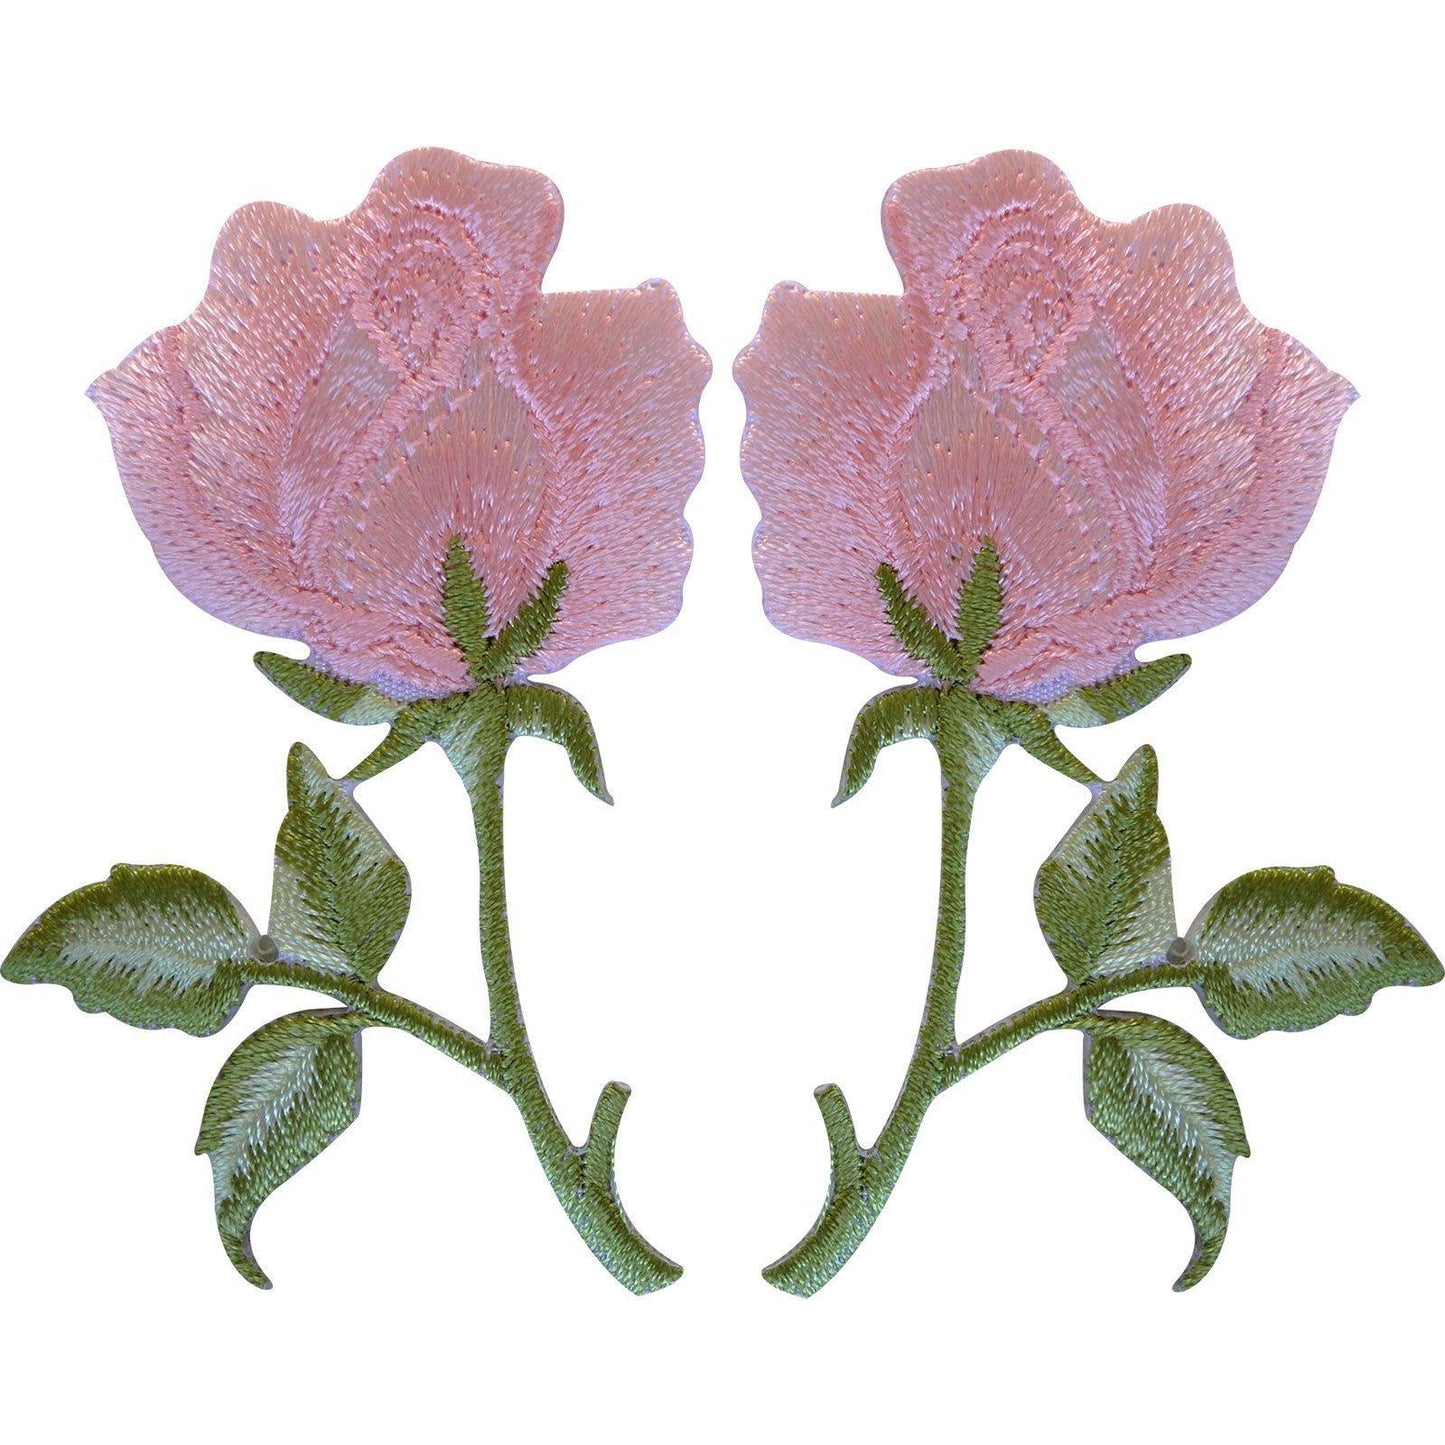 Pair of Pink Roses Patches Iron On / Sew On Embroidered Rose Flower Patch Badge